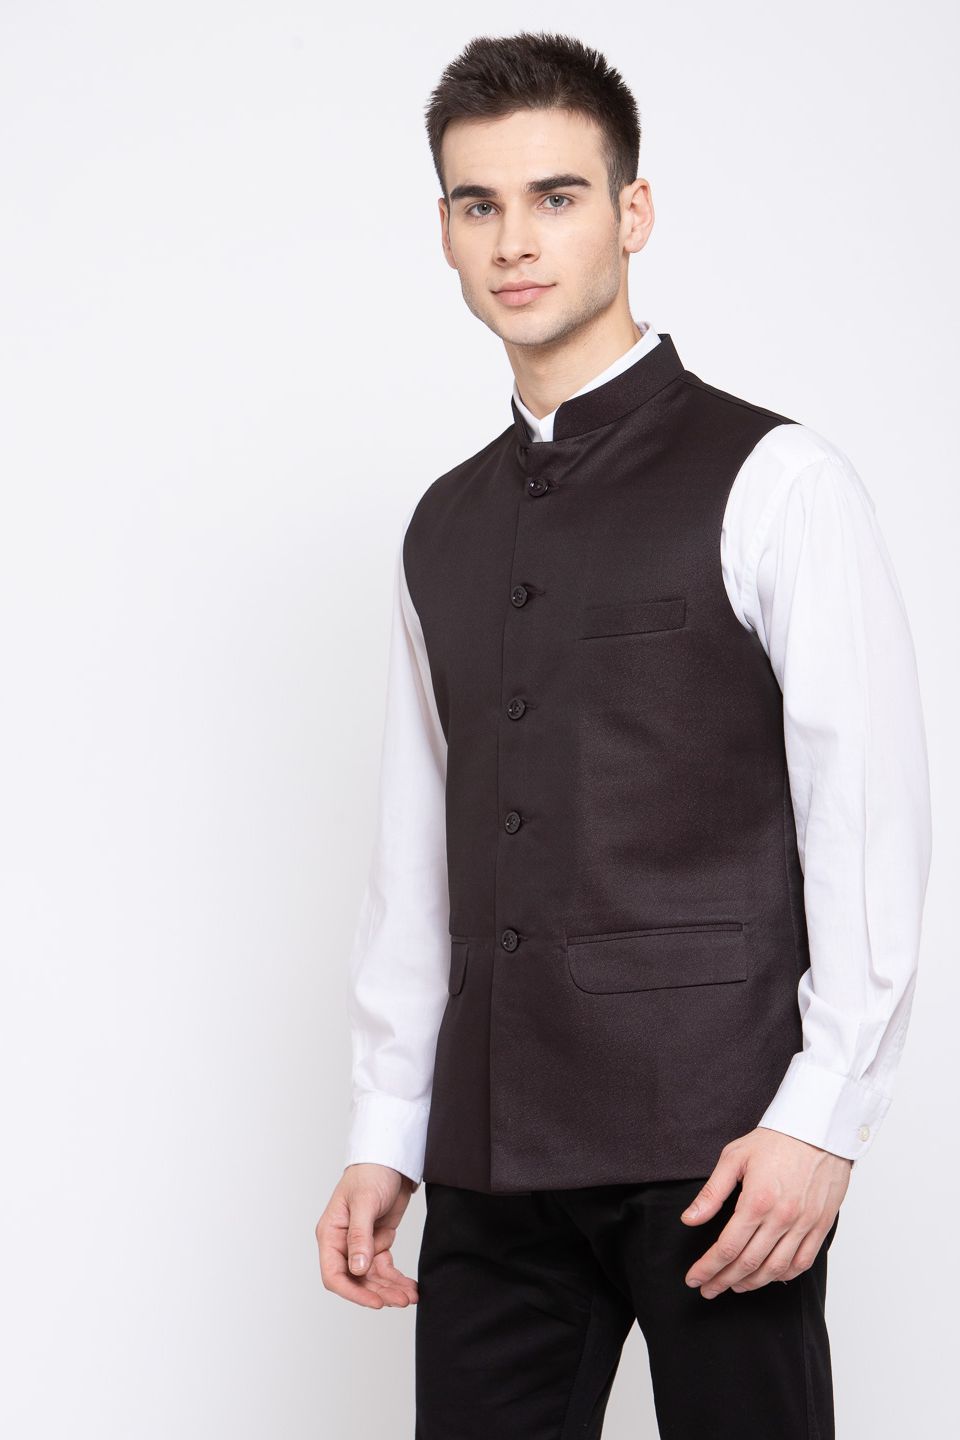 Wintage Men's Poly Blend Formal and Evening Nehru Jacket Vest Waistcoat : Coffee